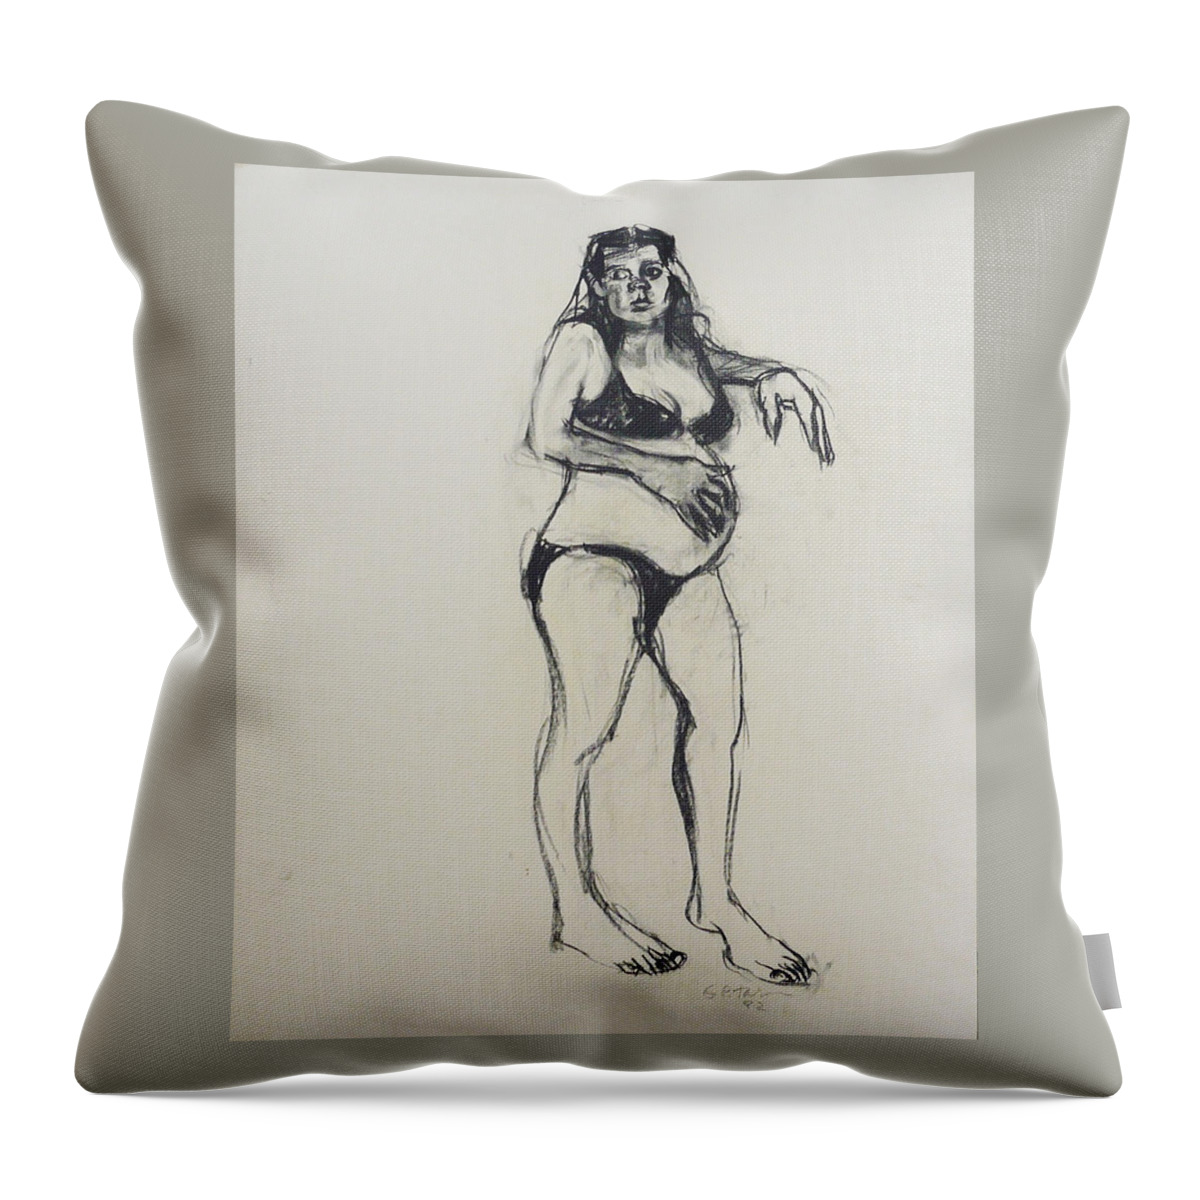 Pregnant Woman Throw Pillow featuring the drawing Pregnant Woman in Bathing Suit by Galya Tarmu